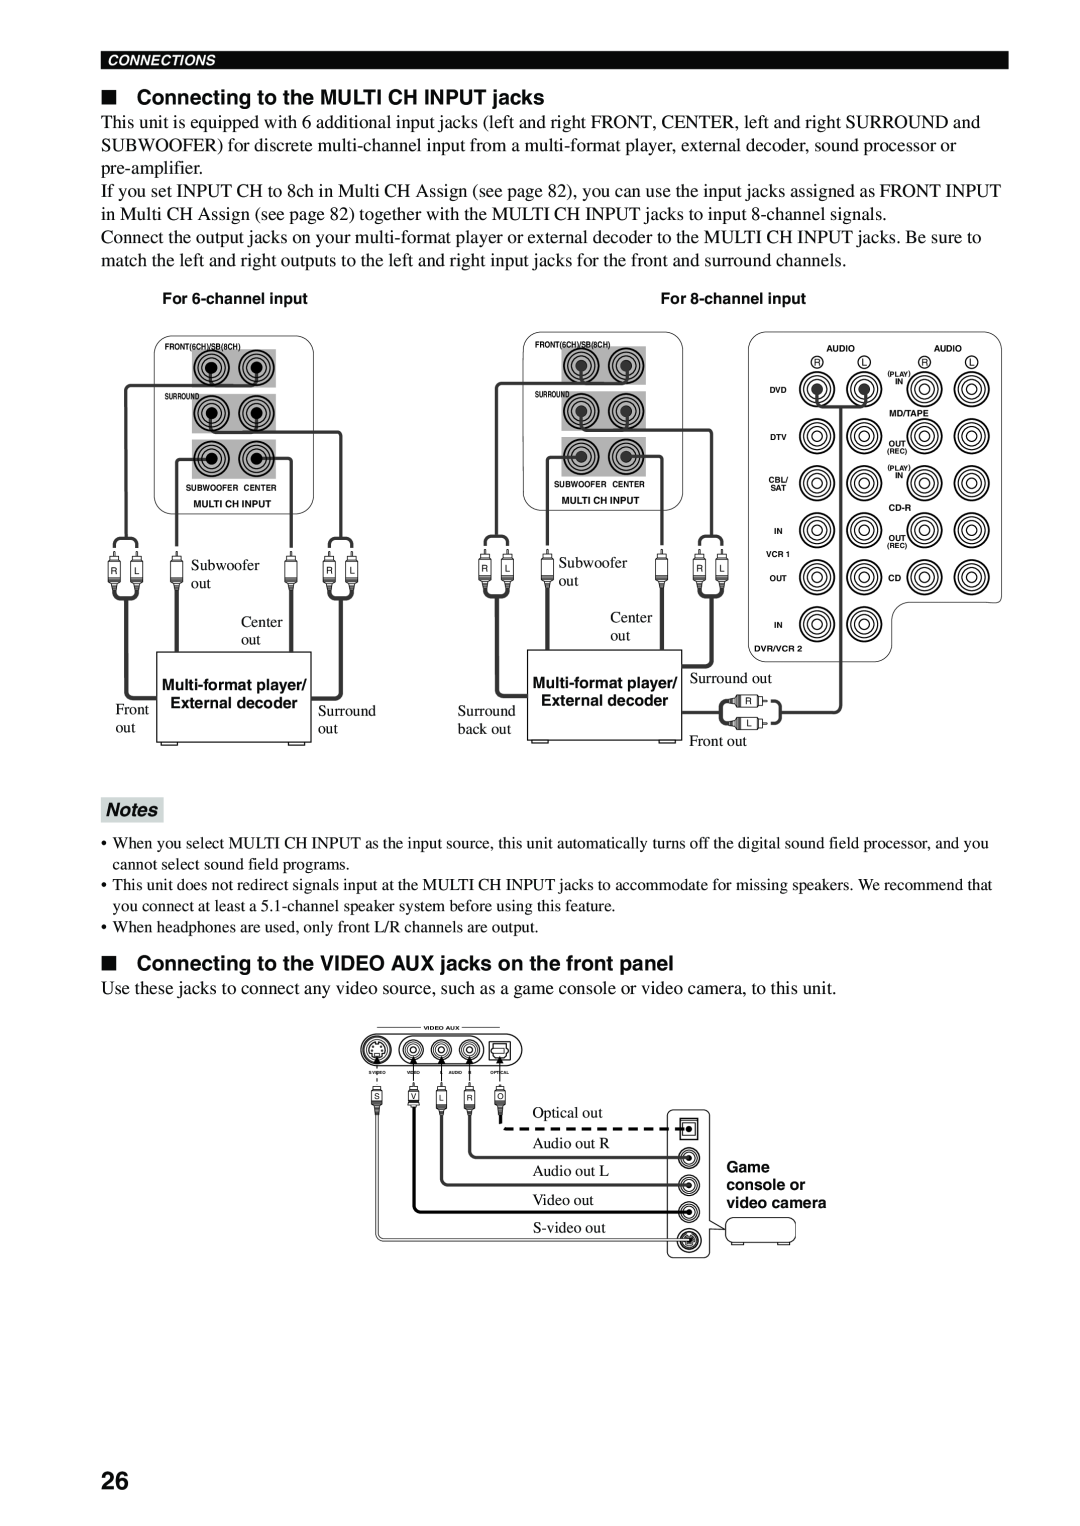 Yamaha X-V2600 Connecting to the MULTI CH INPUT jacks, Notes, For 6-channelinput, Multi-formatplayer External decoder 